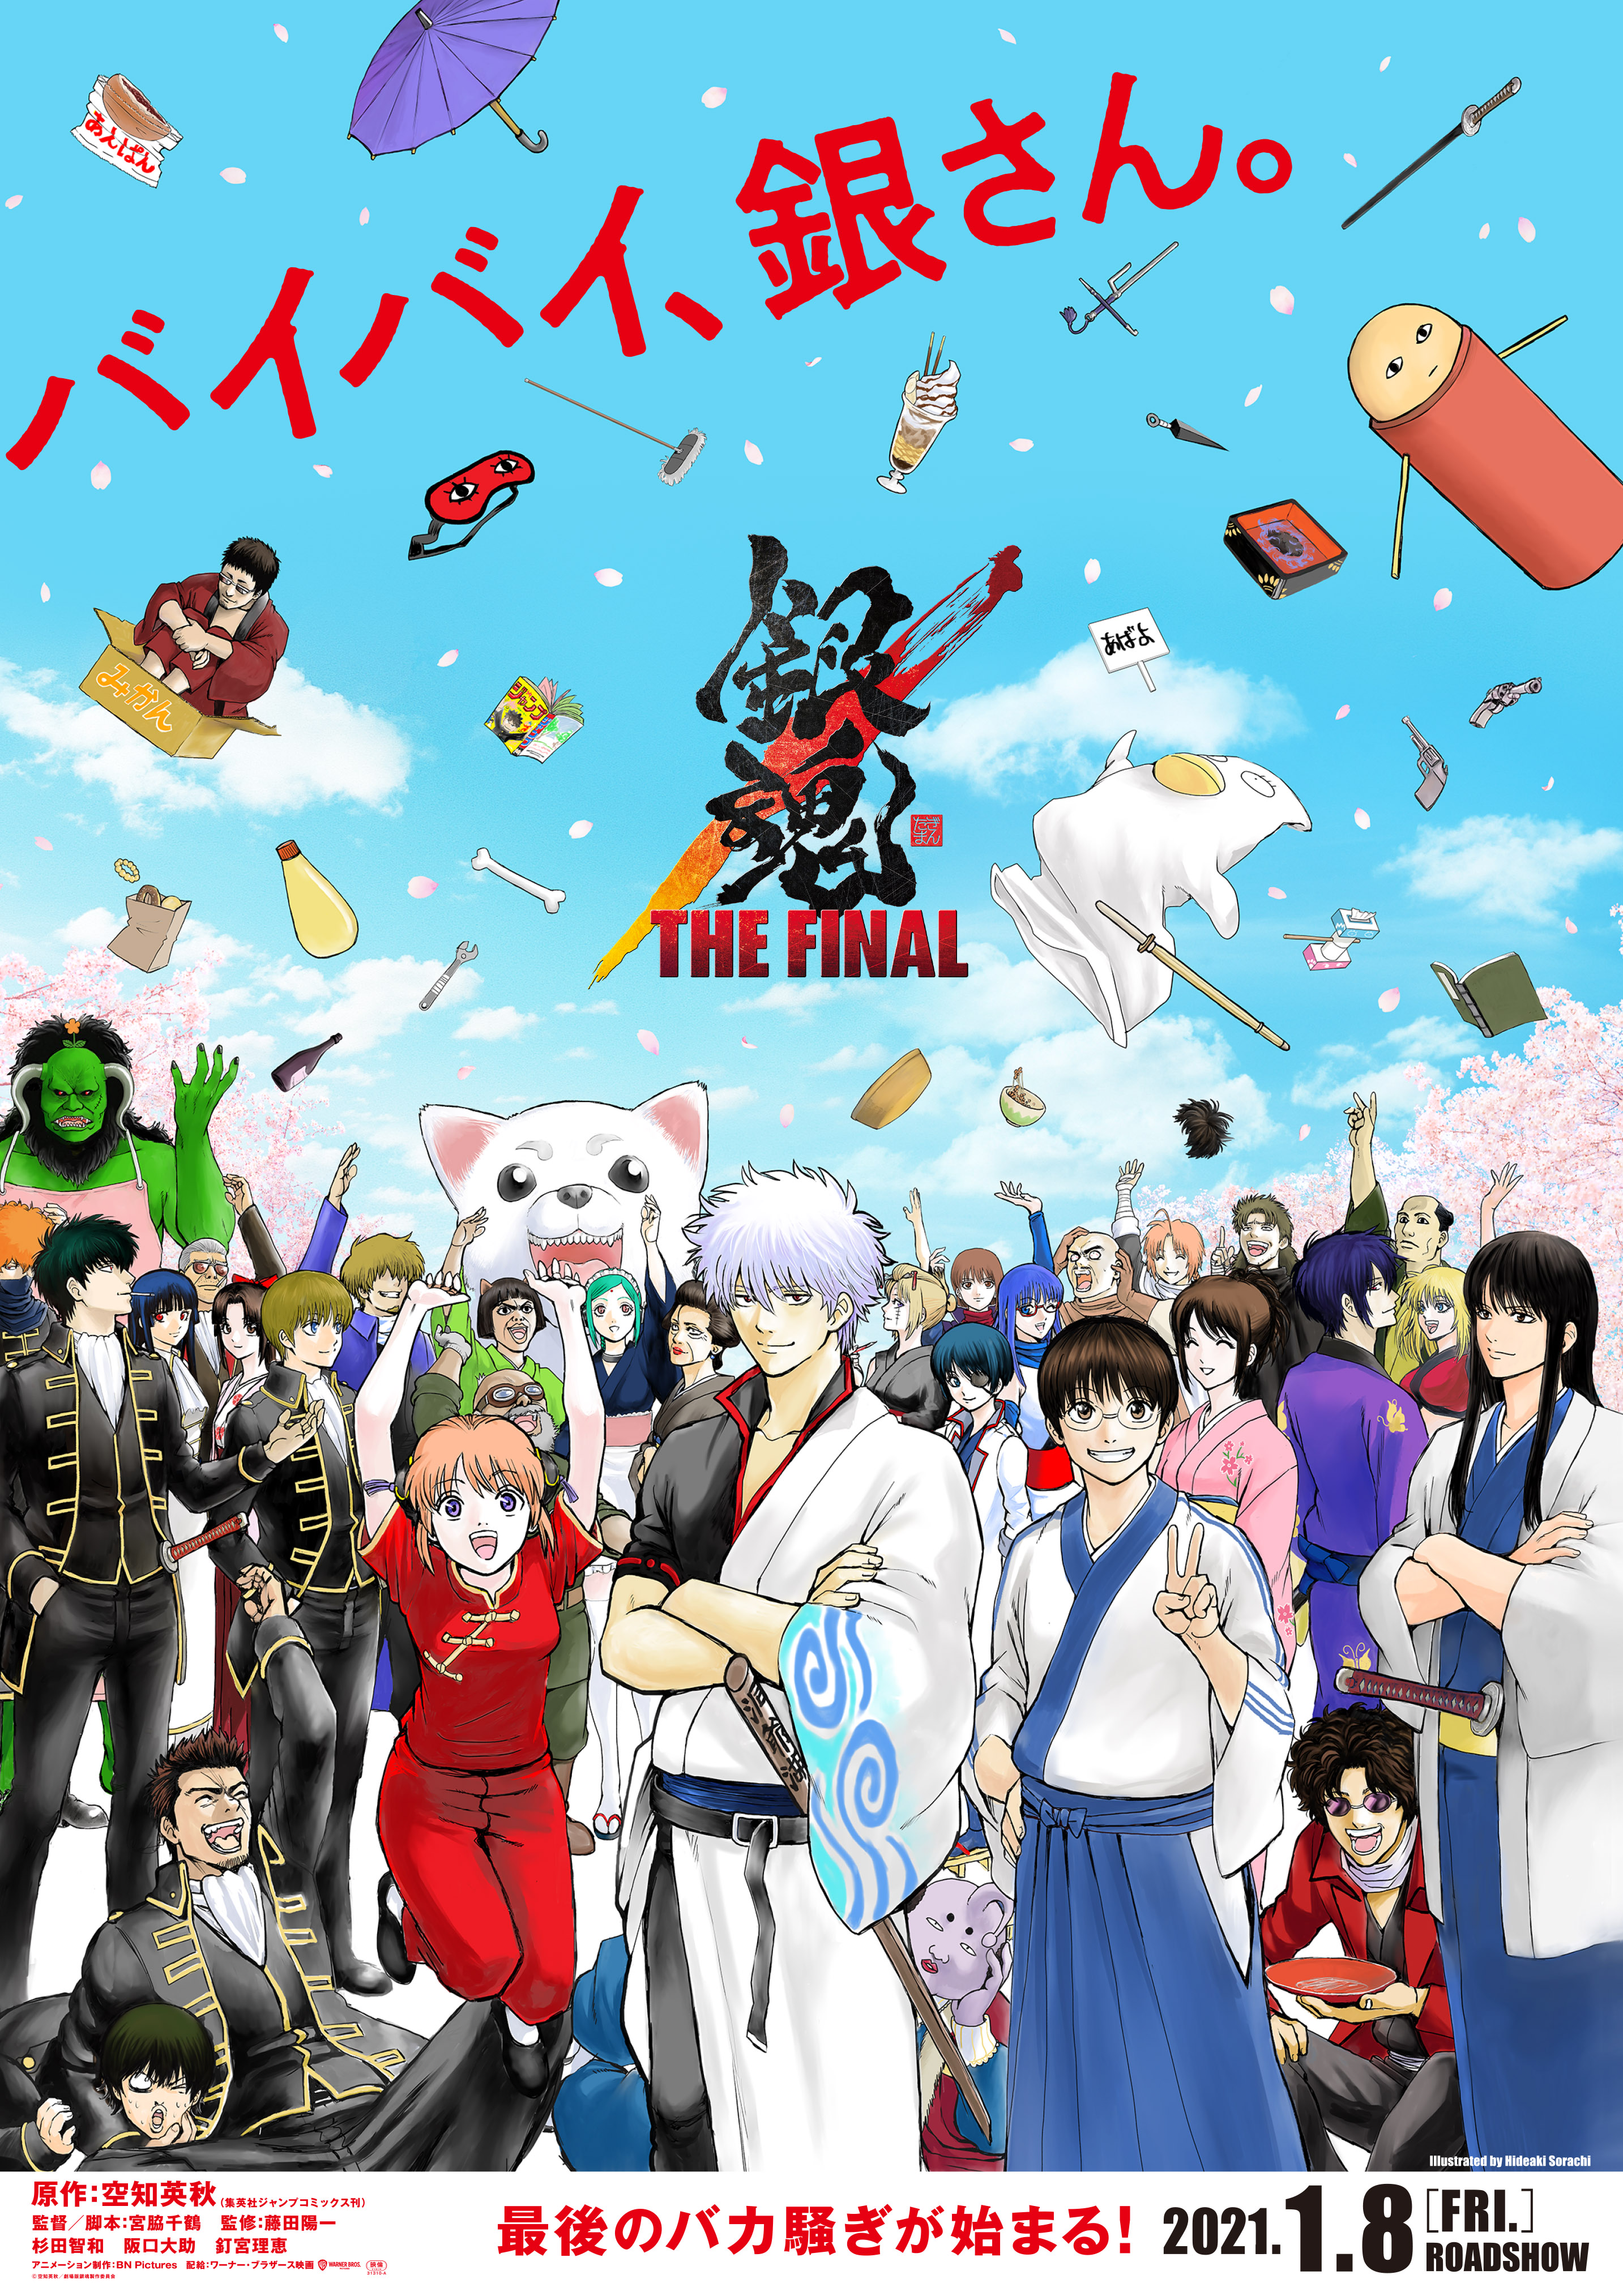 Crunchyroll - Gintama THE FINAL Anime Film Spills the Natto and